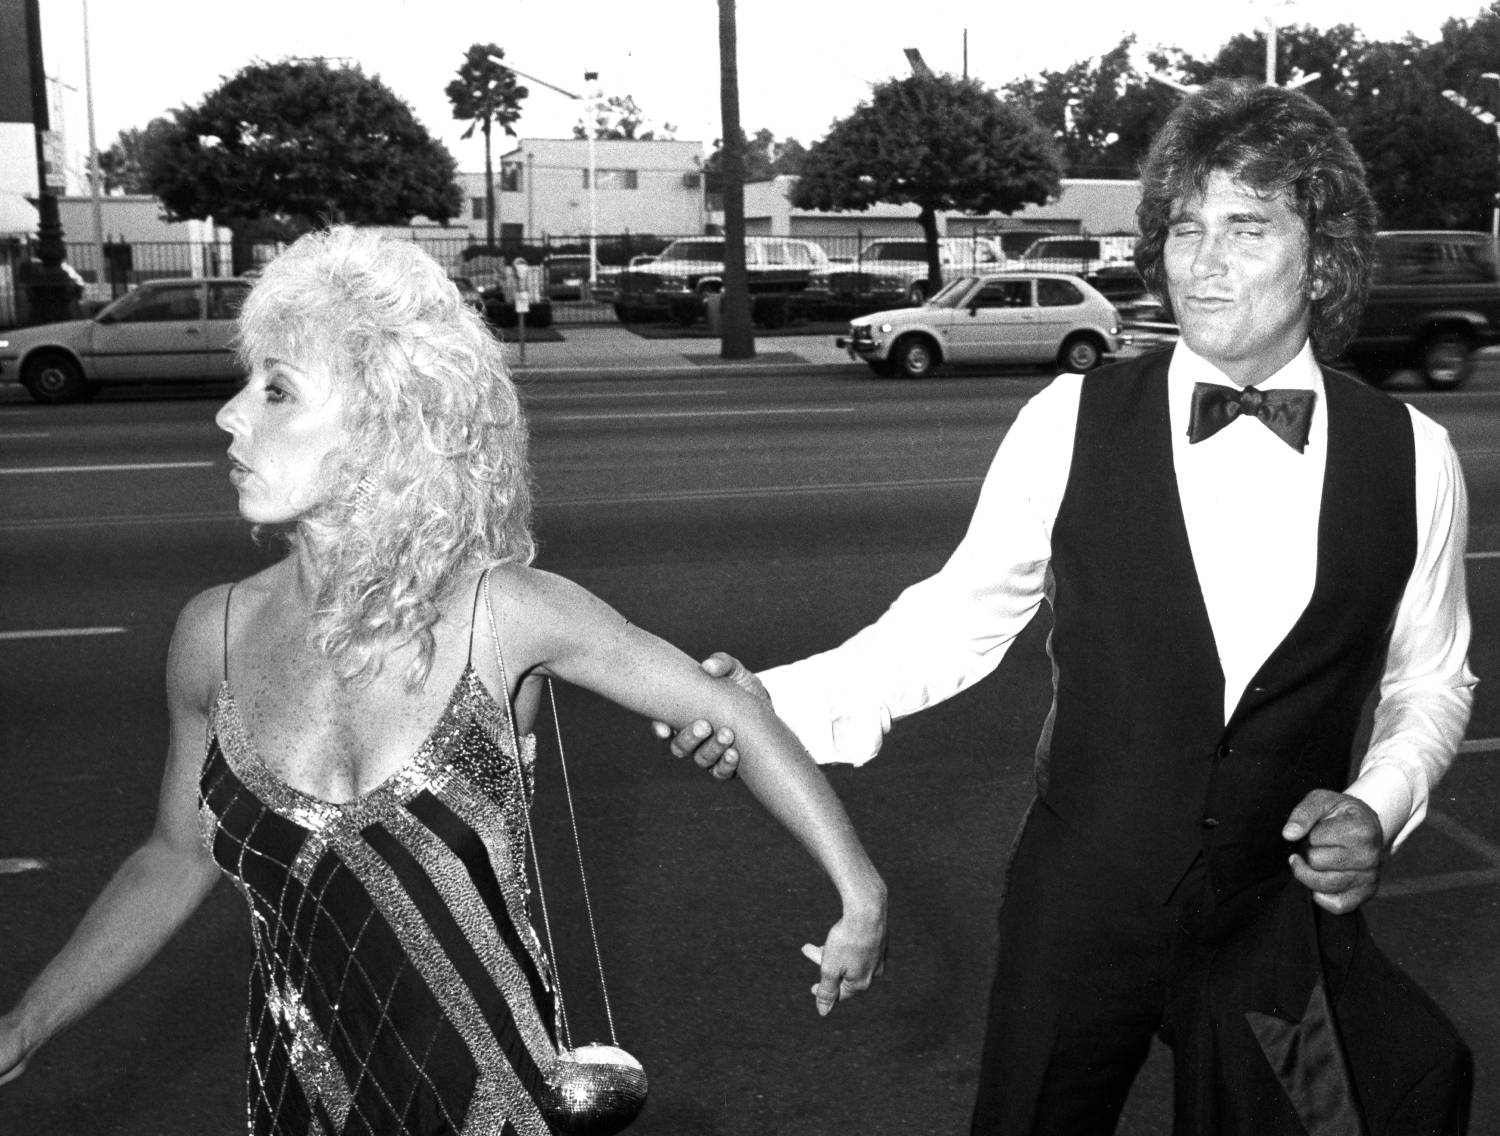 Actor Michael Landon and wife Cindy Clerico attend the premiere of "Sam's Son" on August 15, 1984 at the Academy Theater in Beverly Hills, California. 